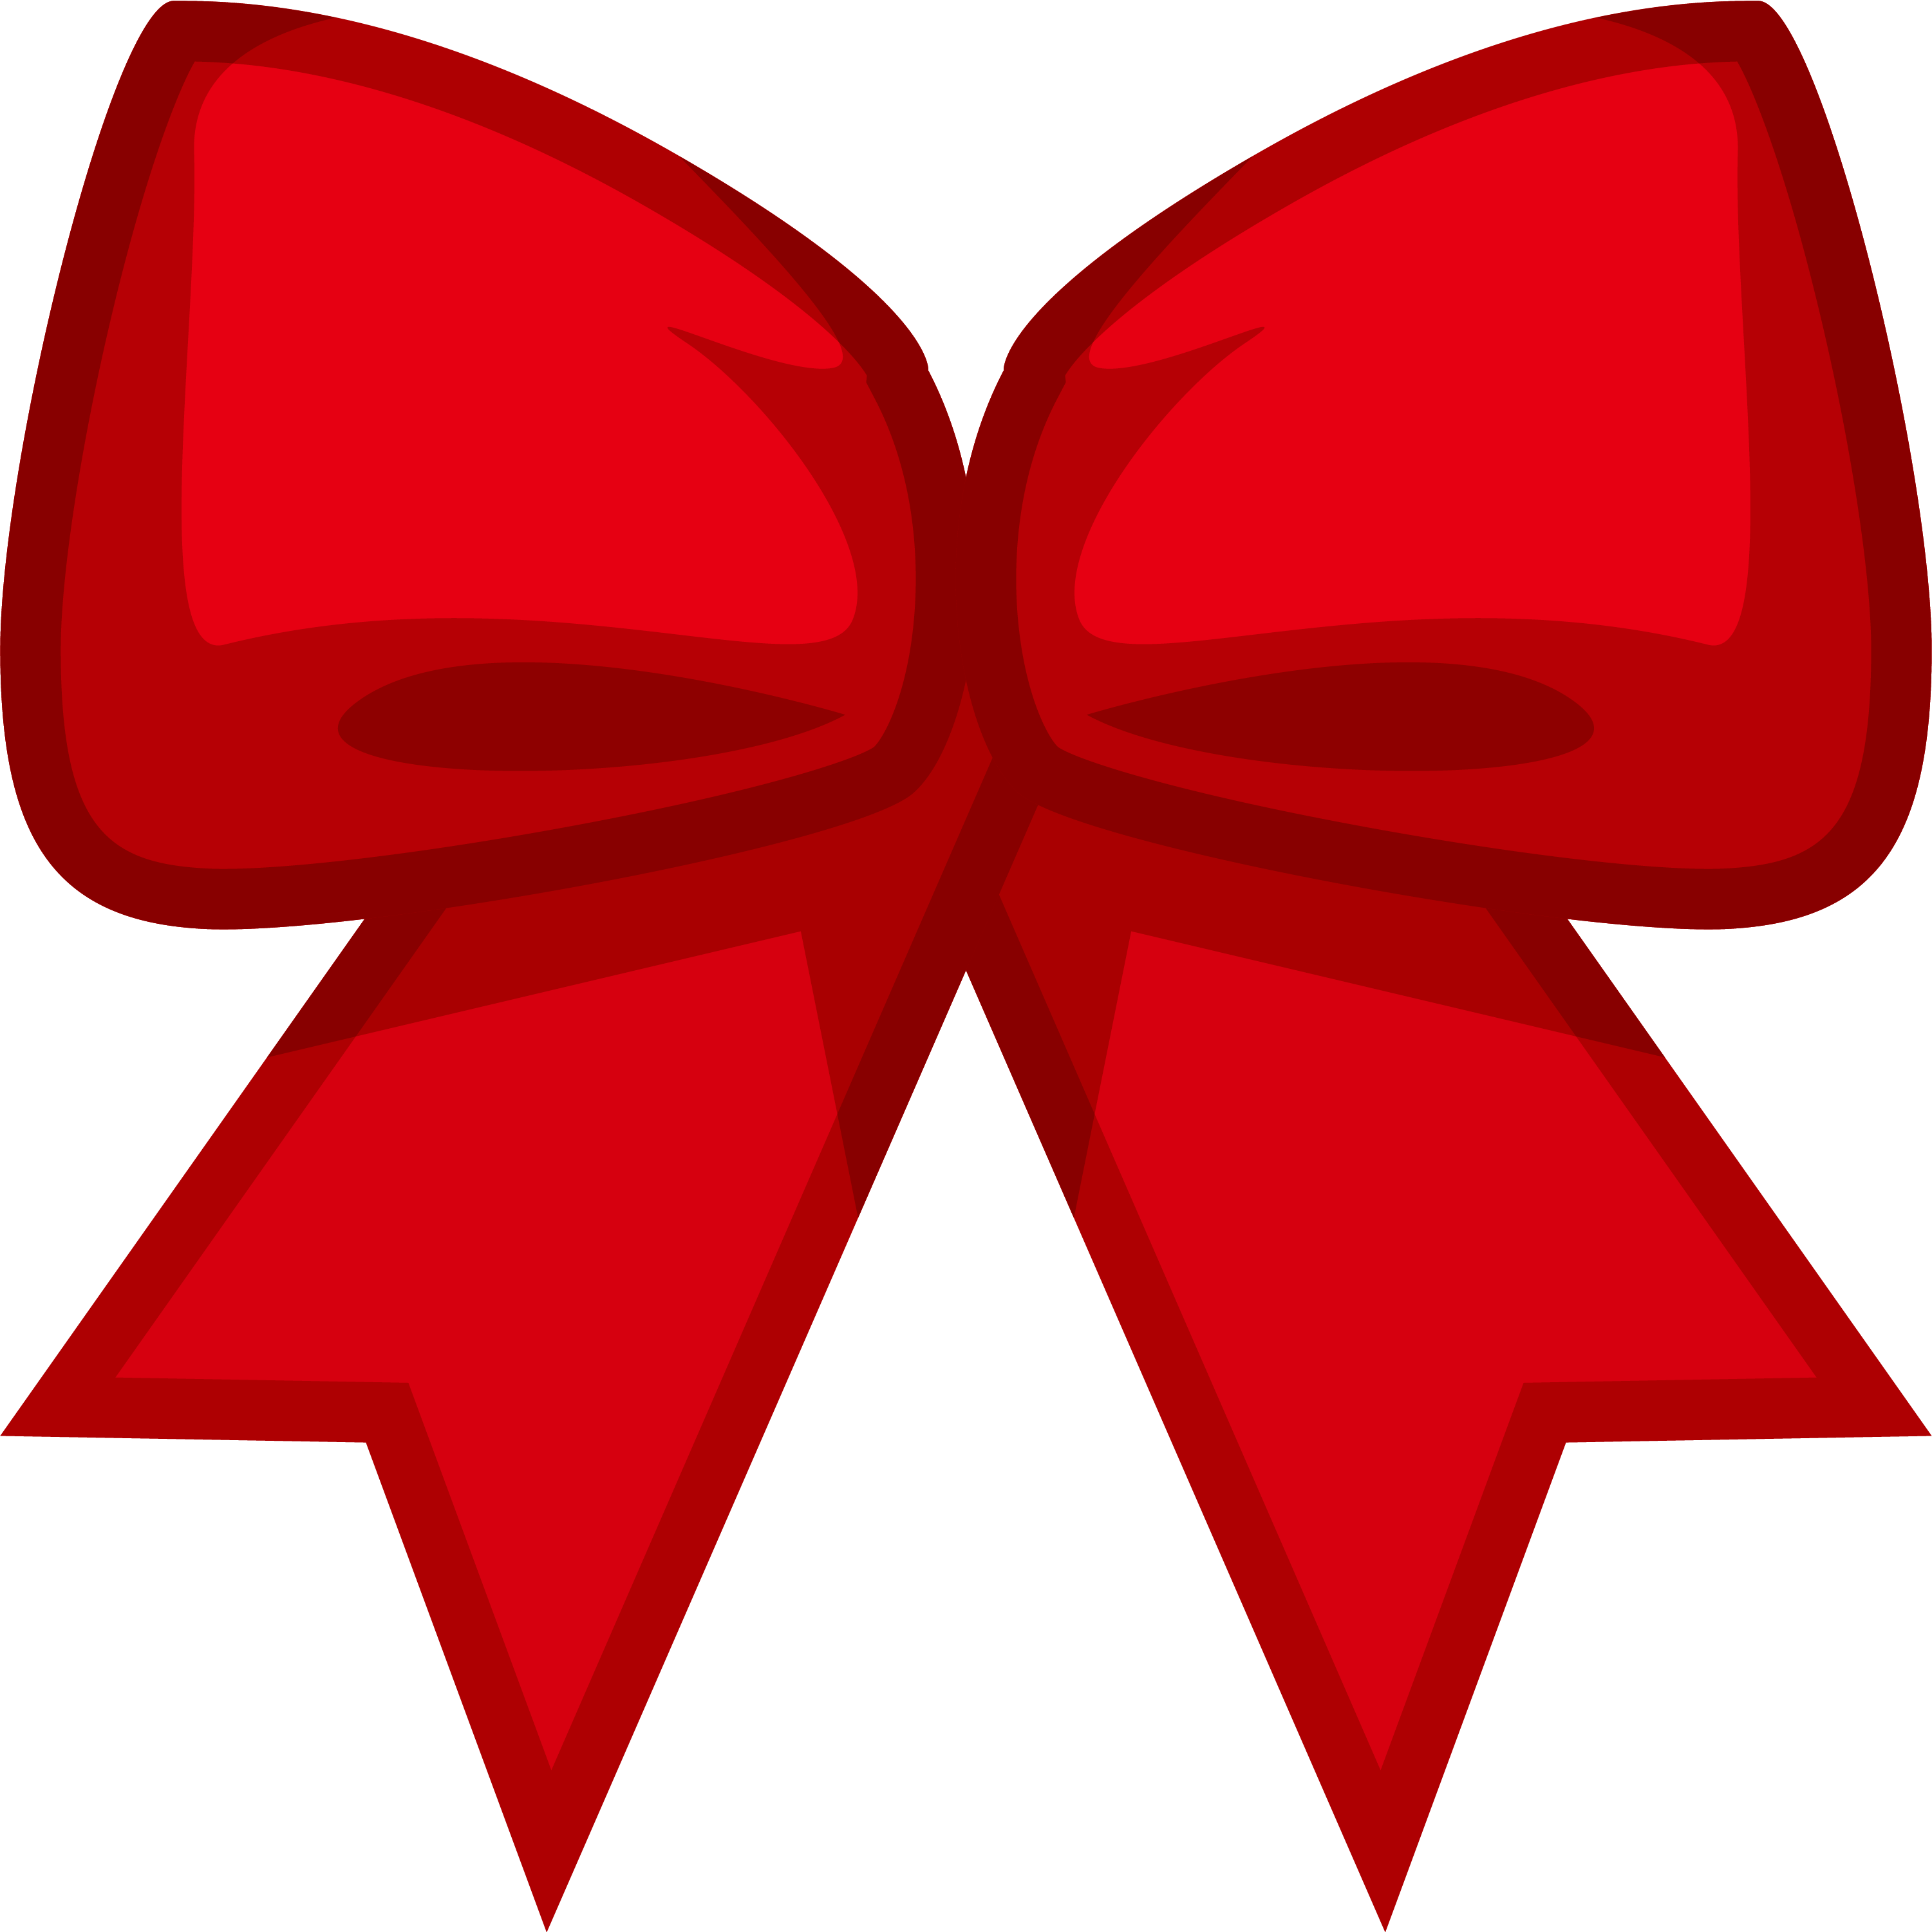 clipart butterfly ribbon